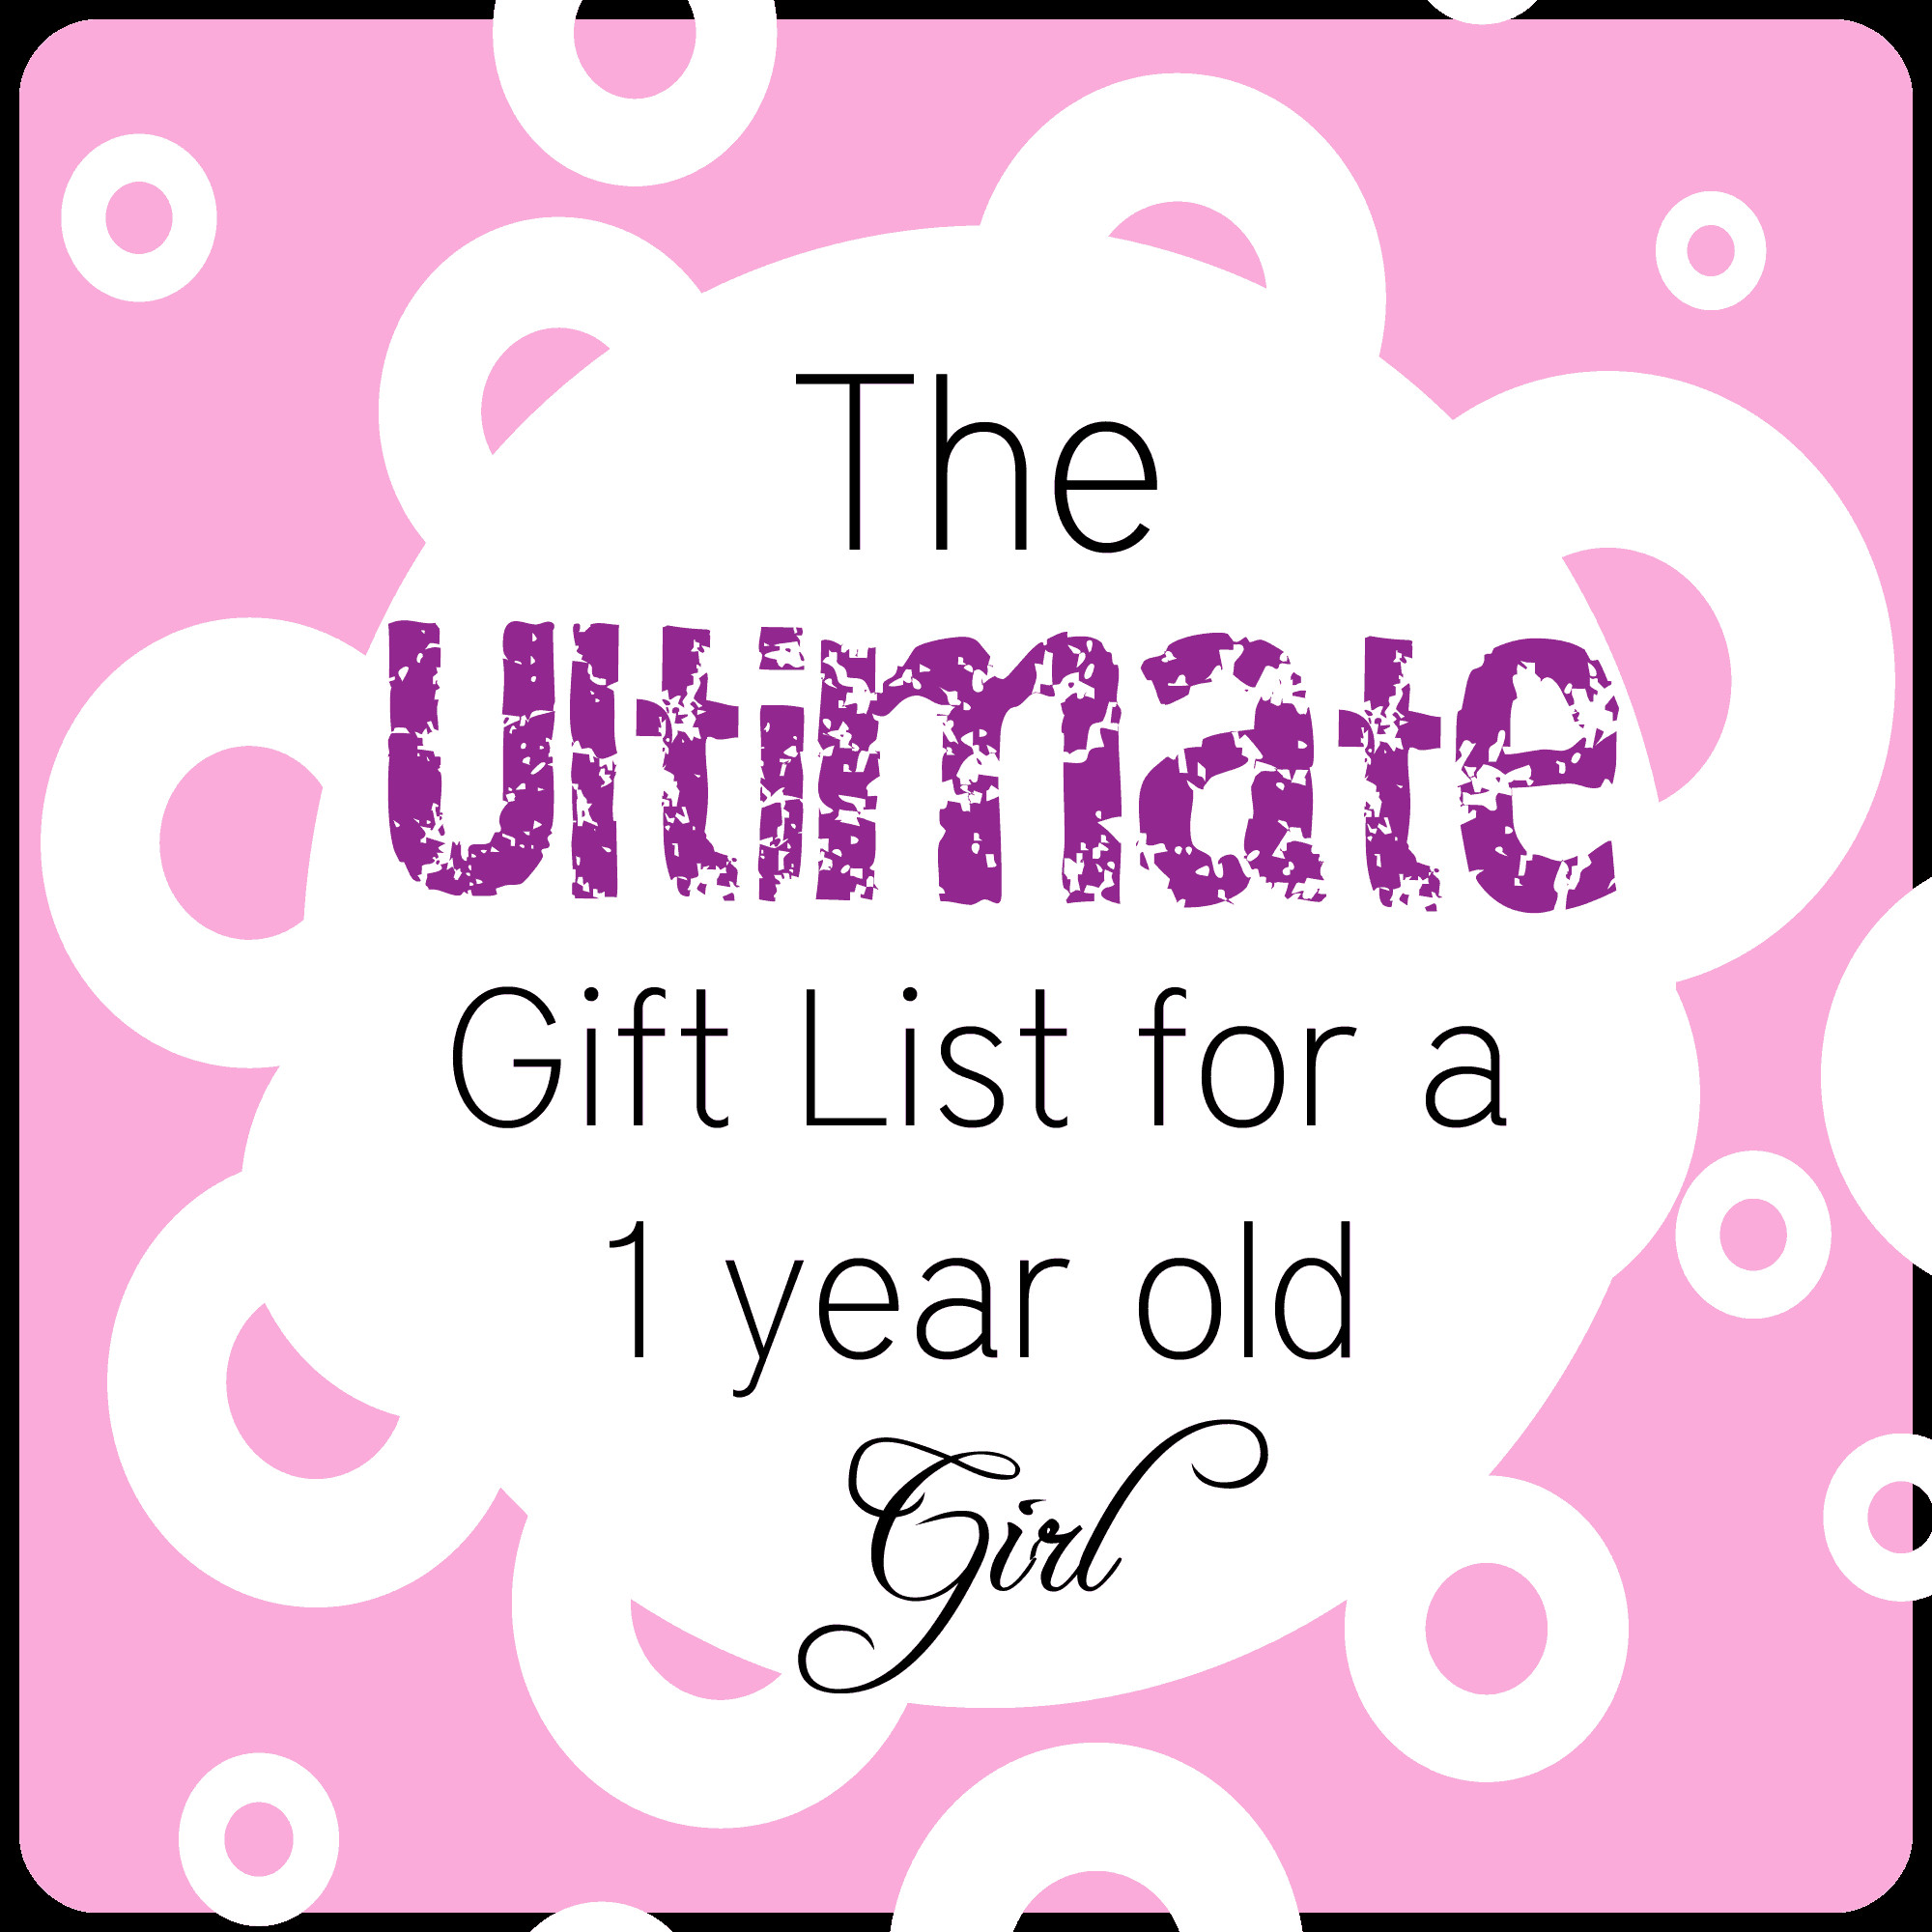 Gifts For A One Year Old Baby Girl
 The Ultimate List of Gift Ideas for a 1 Year Old Girl